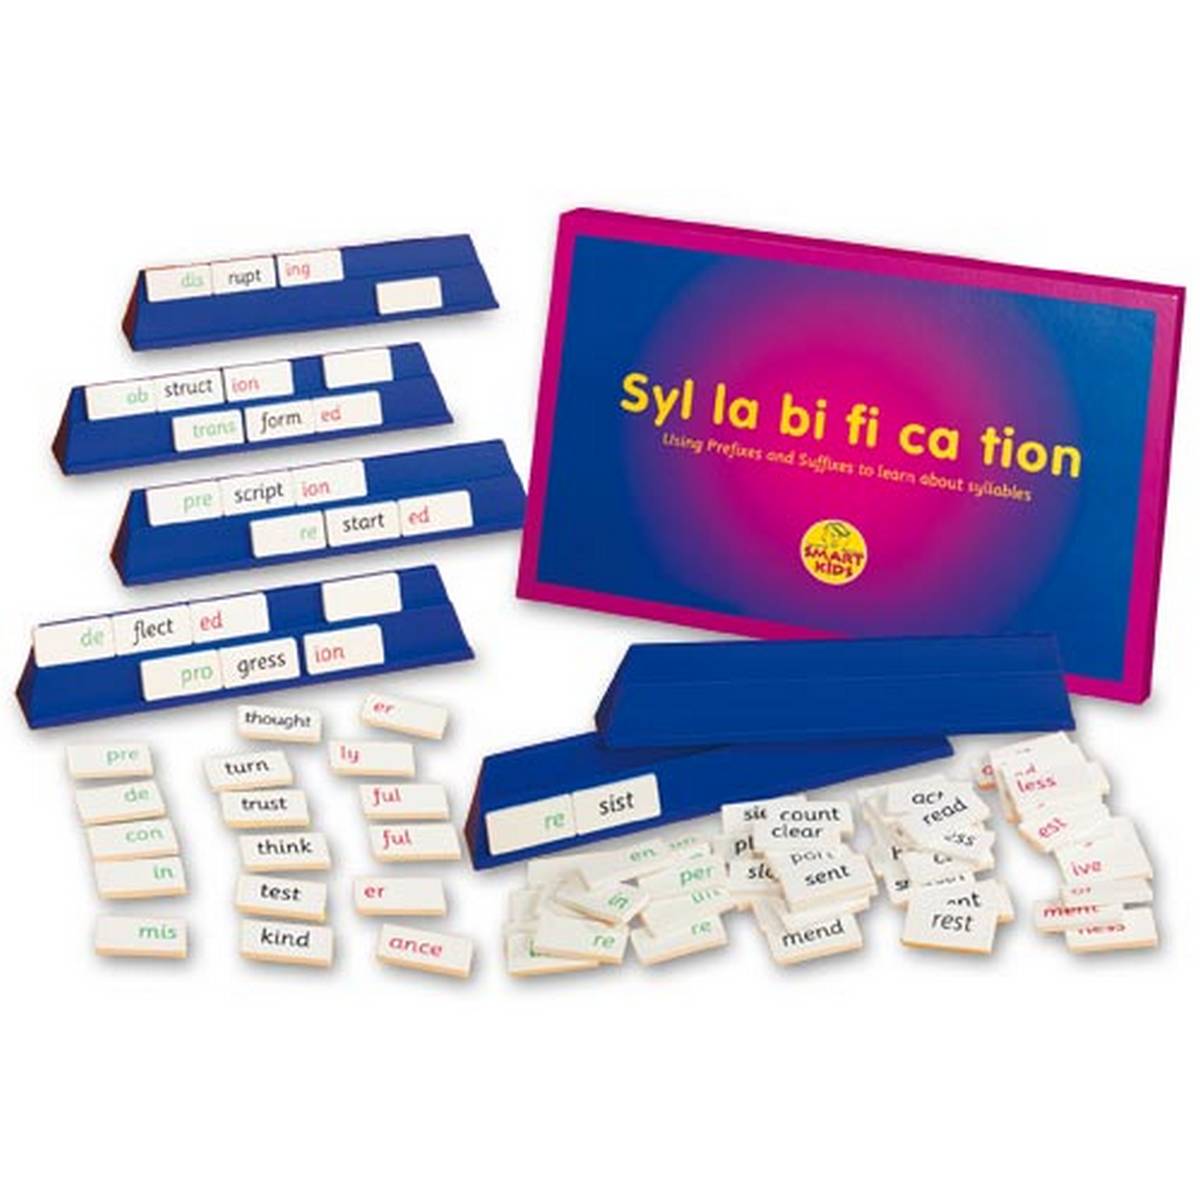 Syl-lab-if-ic-a-tion Game